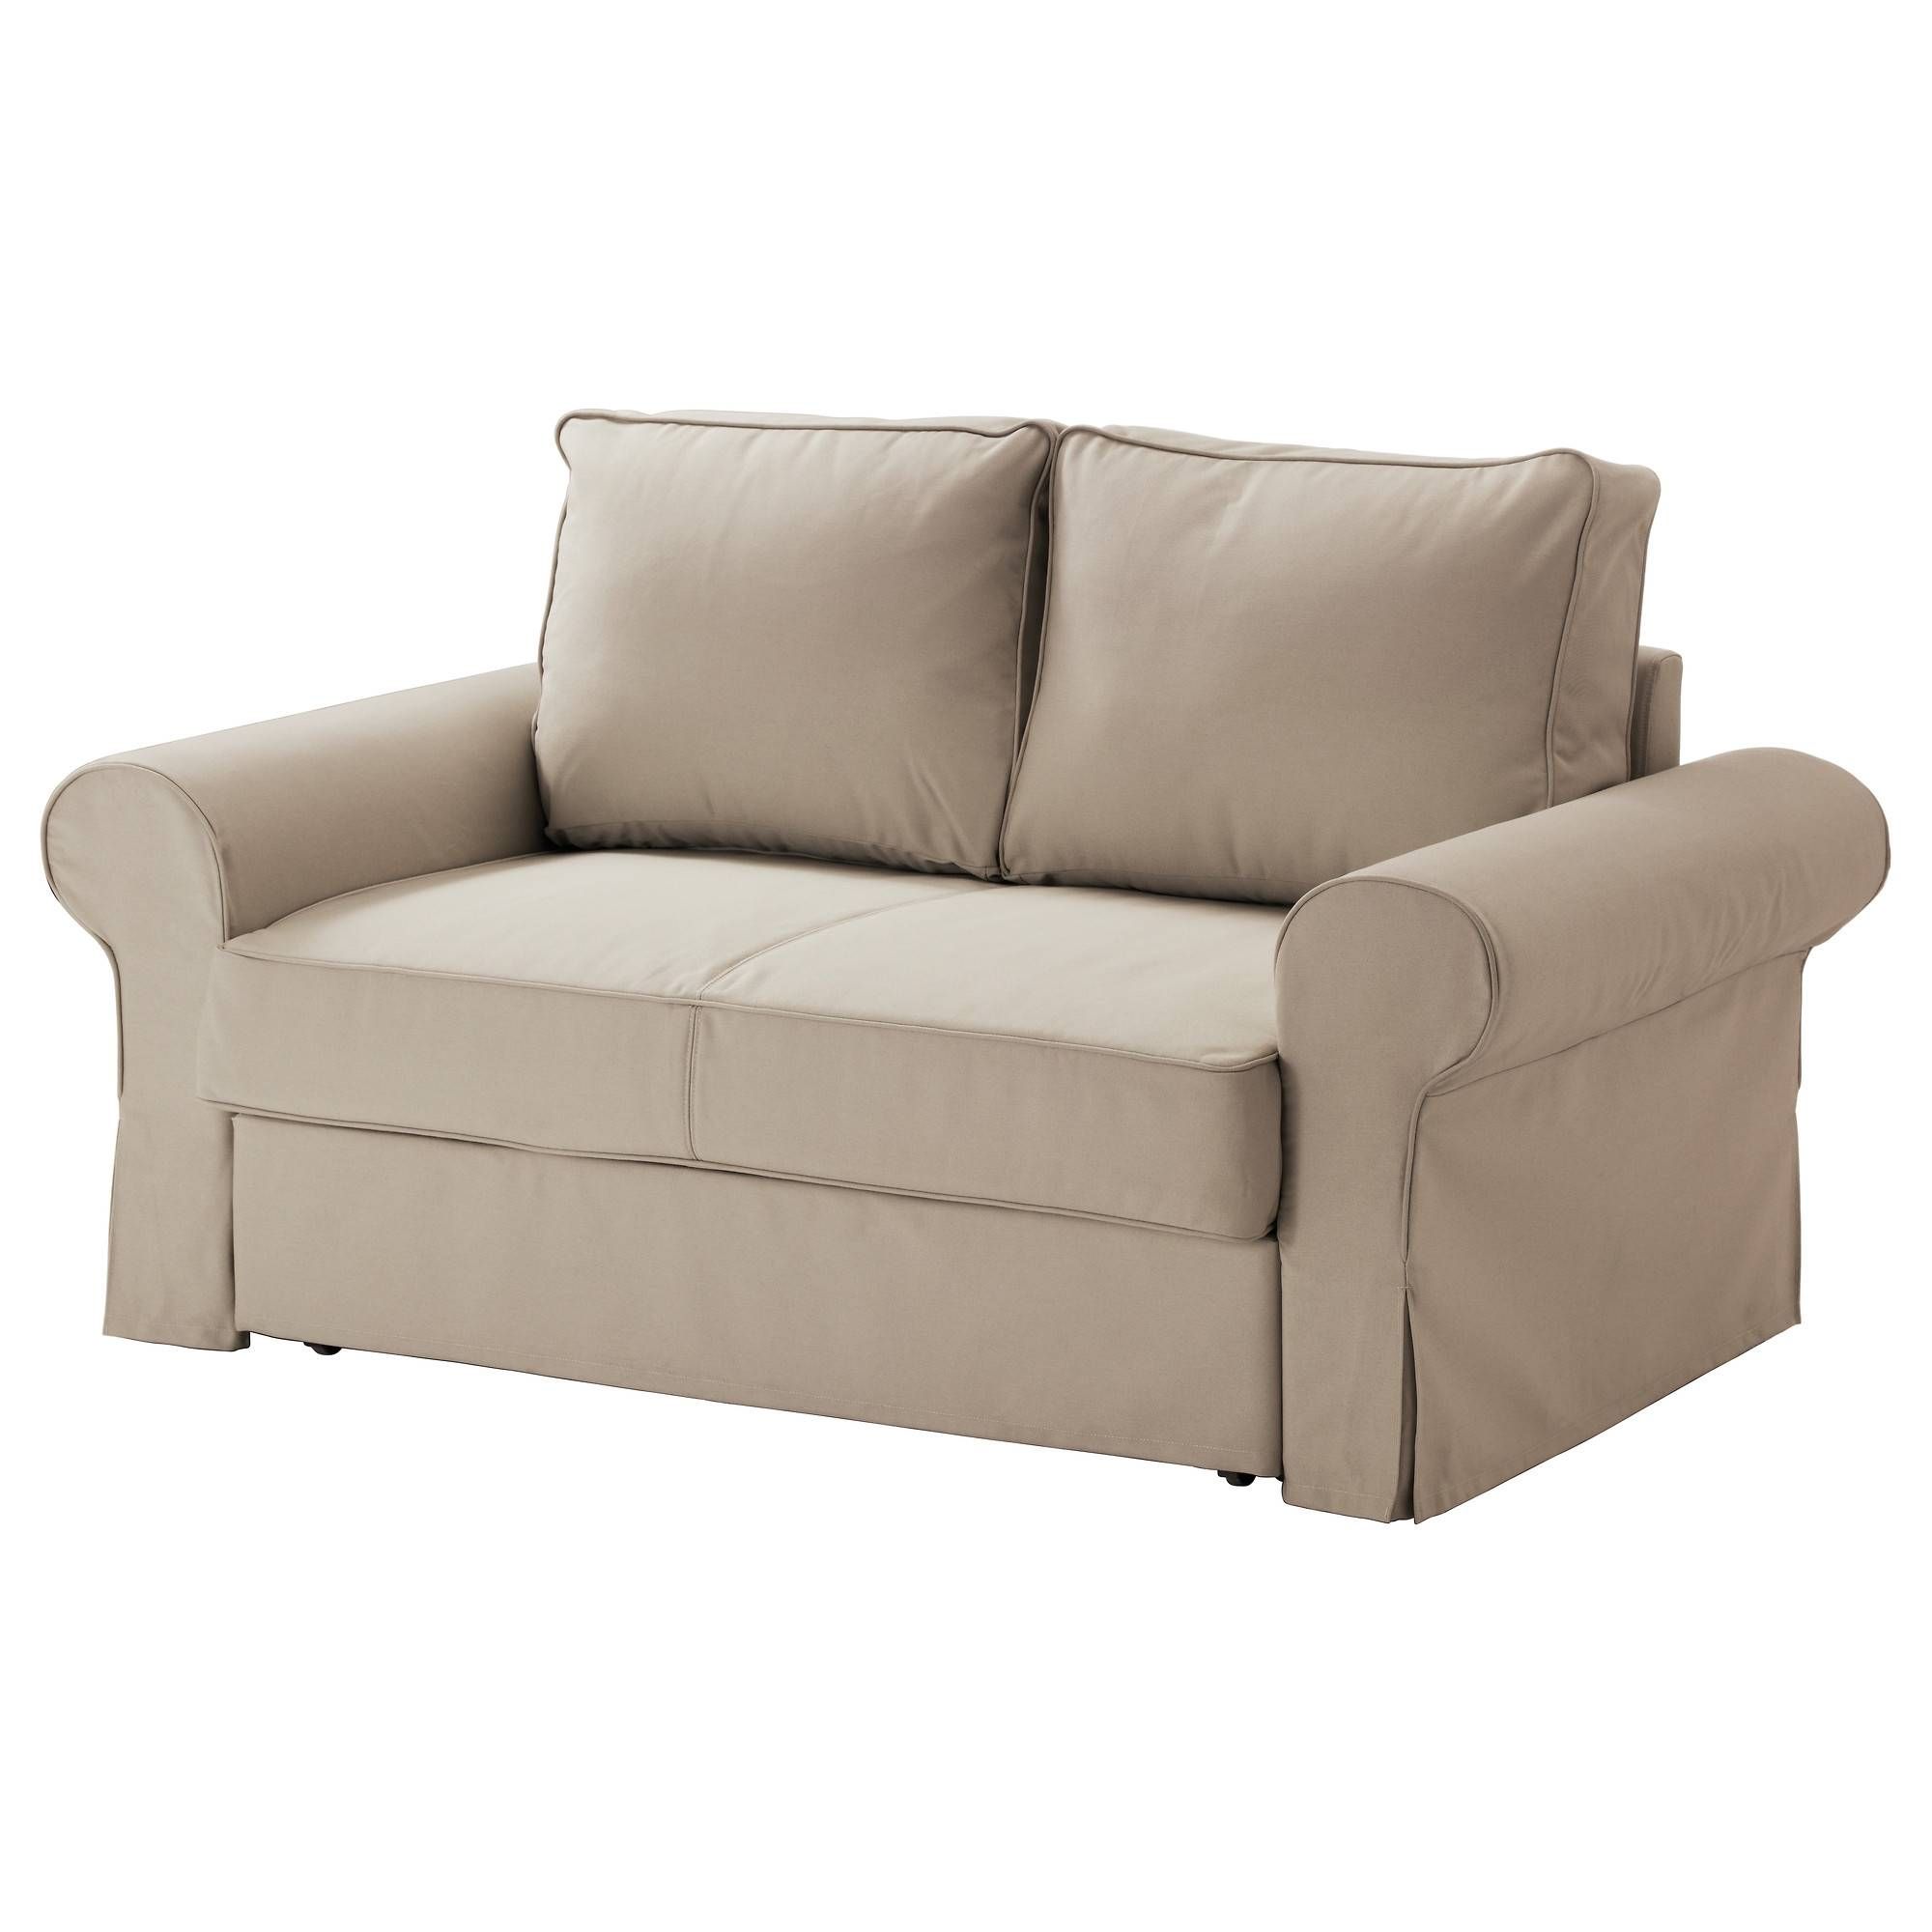 Backabro Two Seat Sofa Bed Ramna Beige – Ikea With Ikea Single Sofa Beds (View 30 of 30)